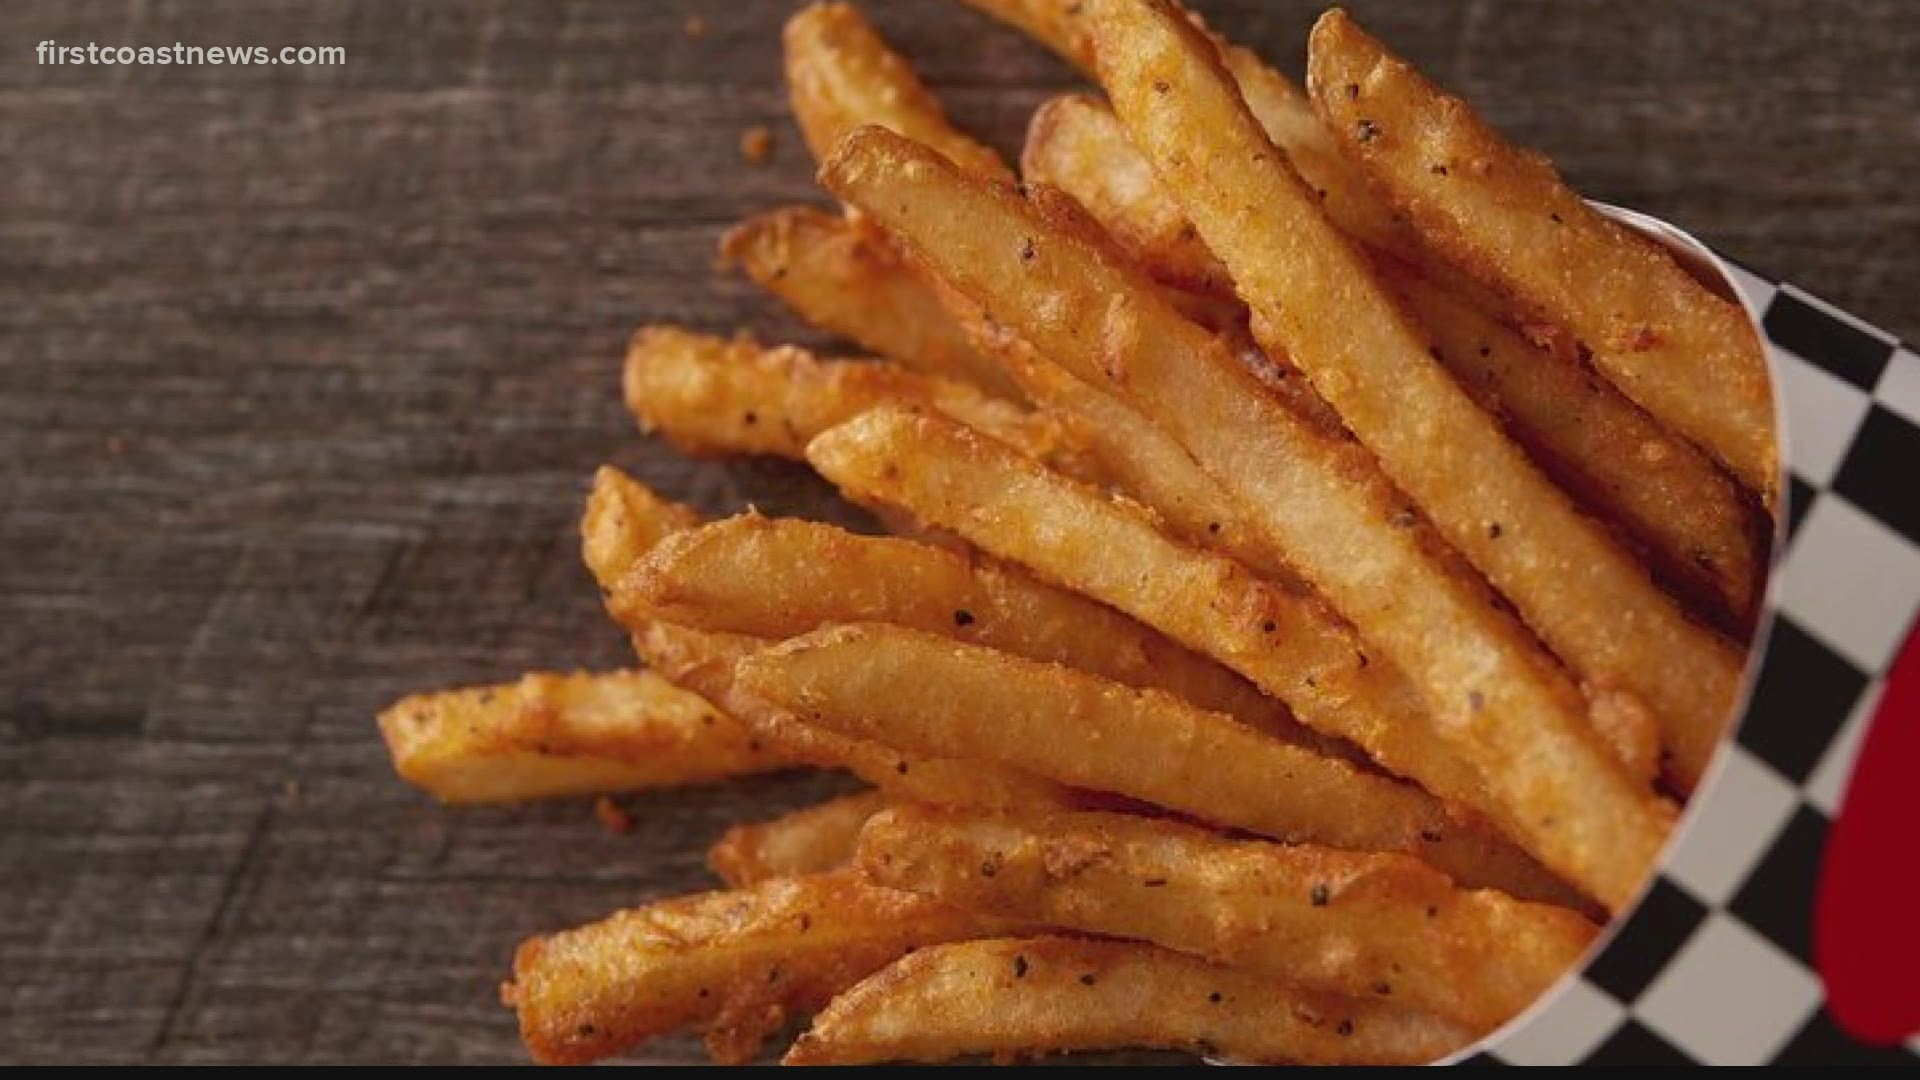 Nothing compares to celebrating with fresh fries, especially when they're free.